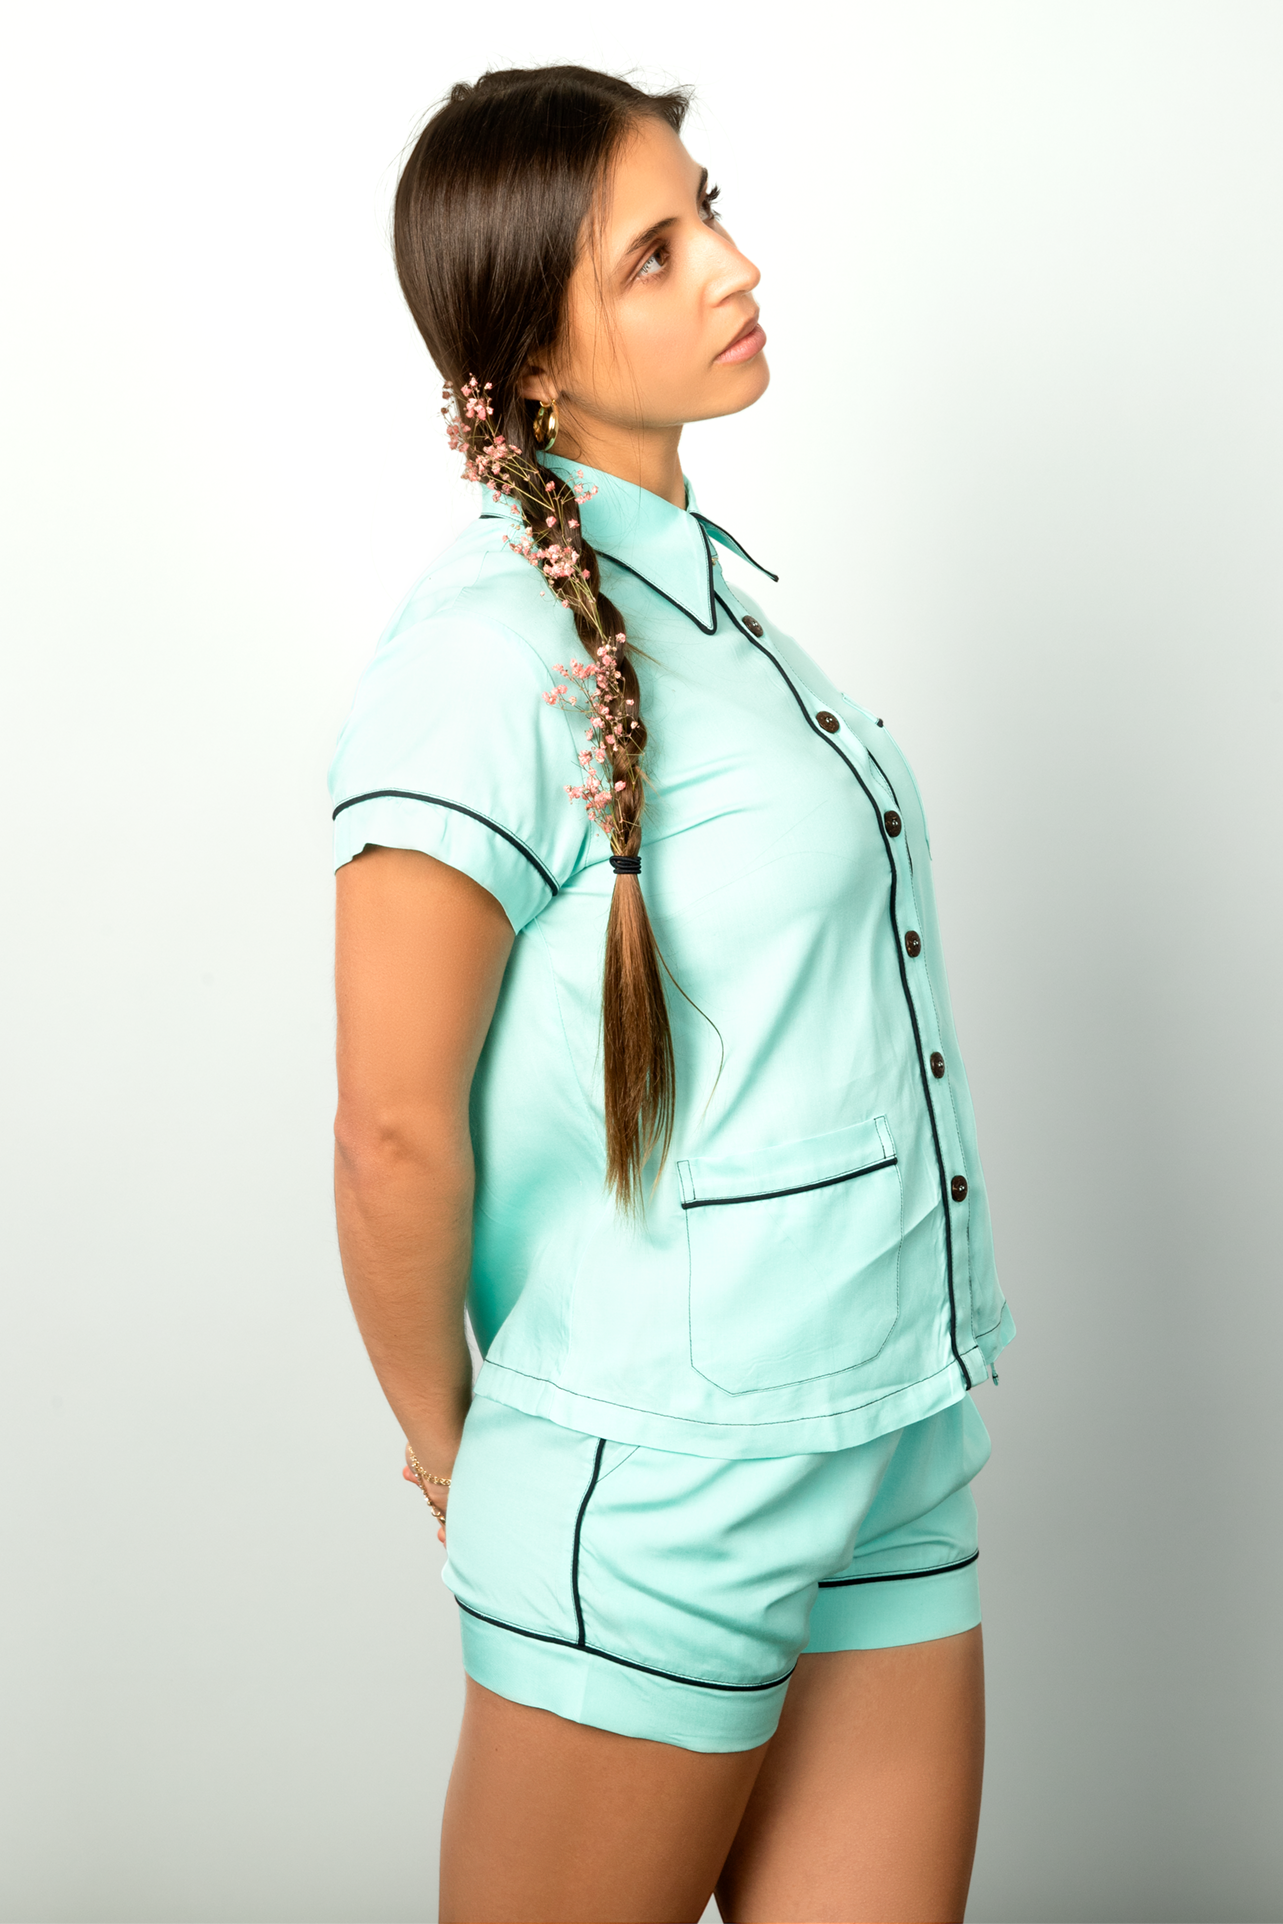 Teal short-sleeved pajama set with black contrasting piping.